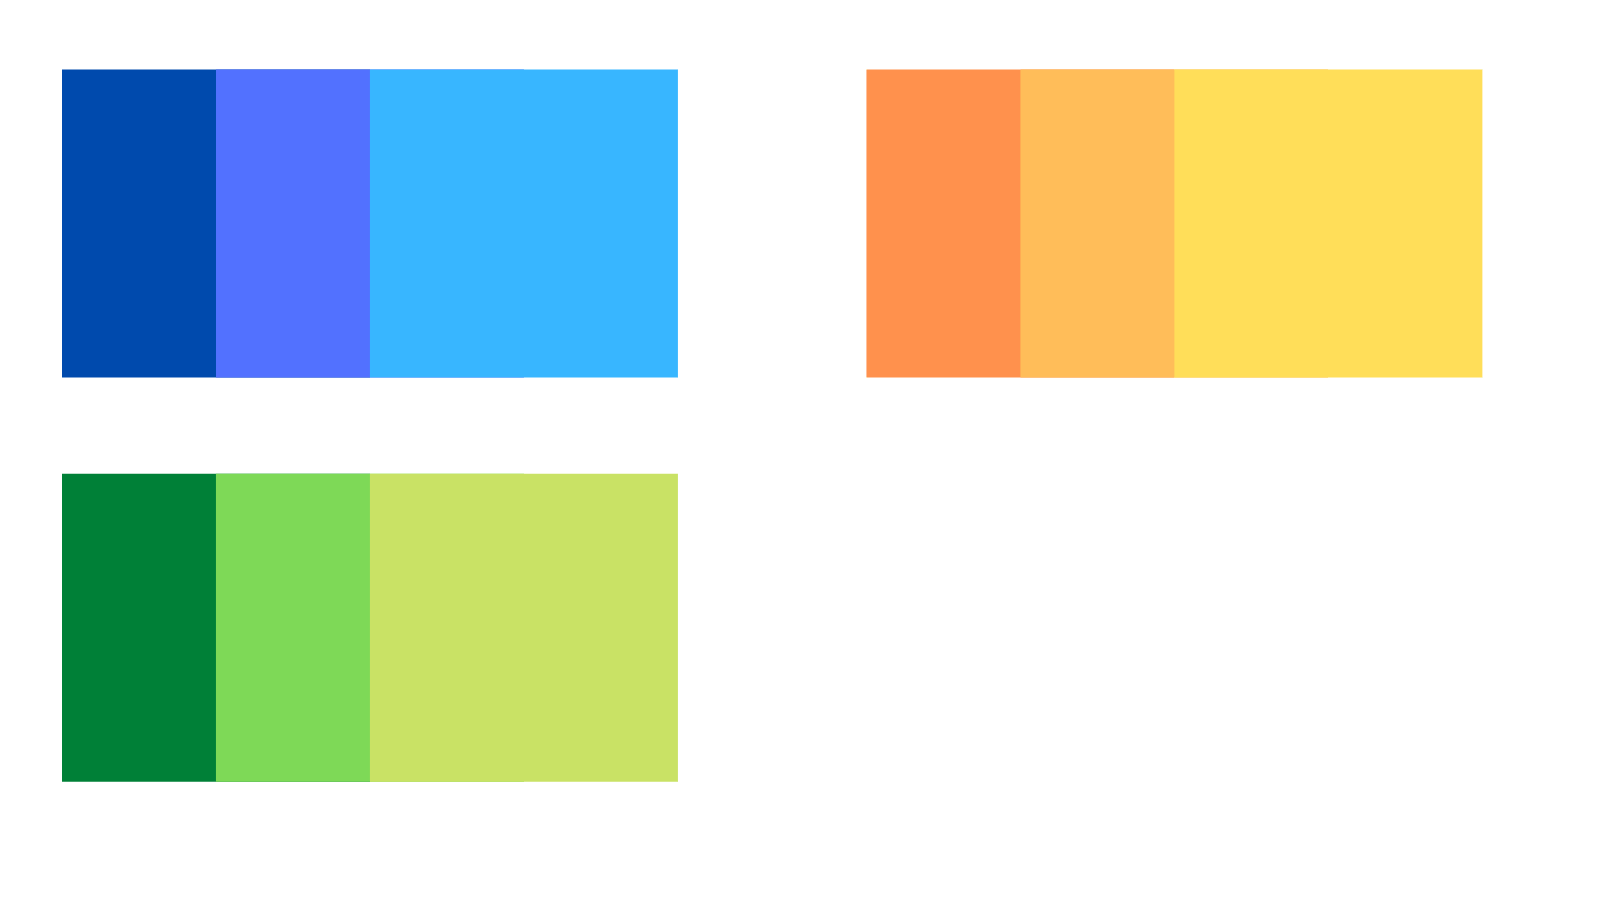 Three shades of blue grouped together, three shades of orange grouped together, and three shades of green grouped together